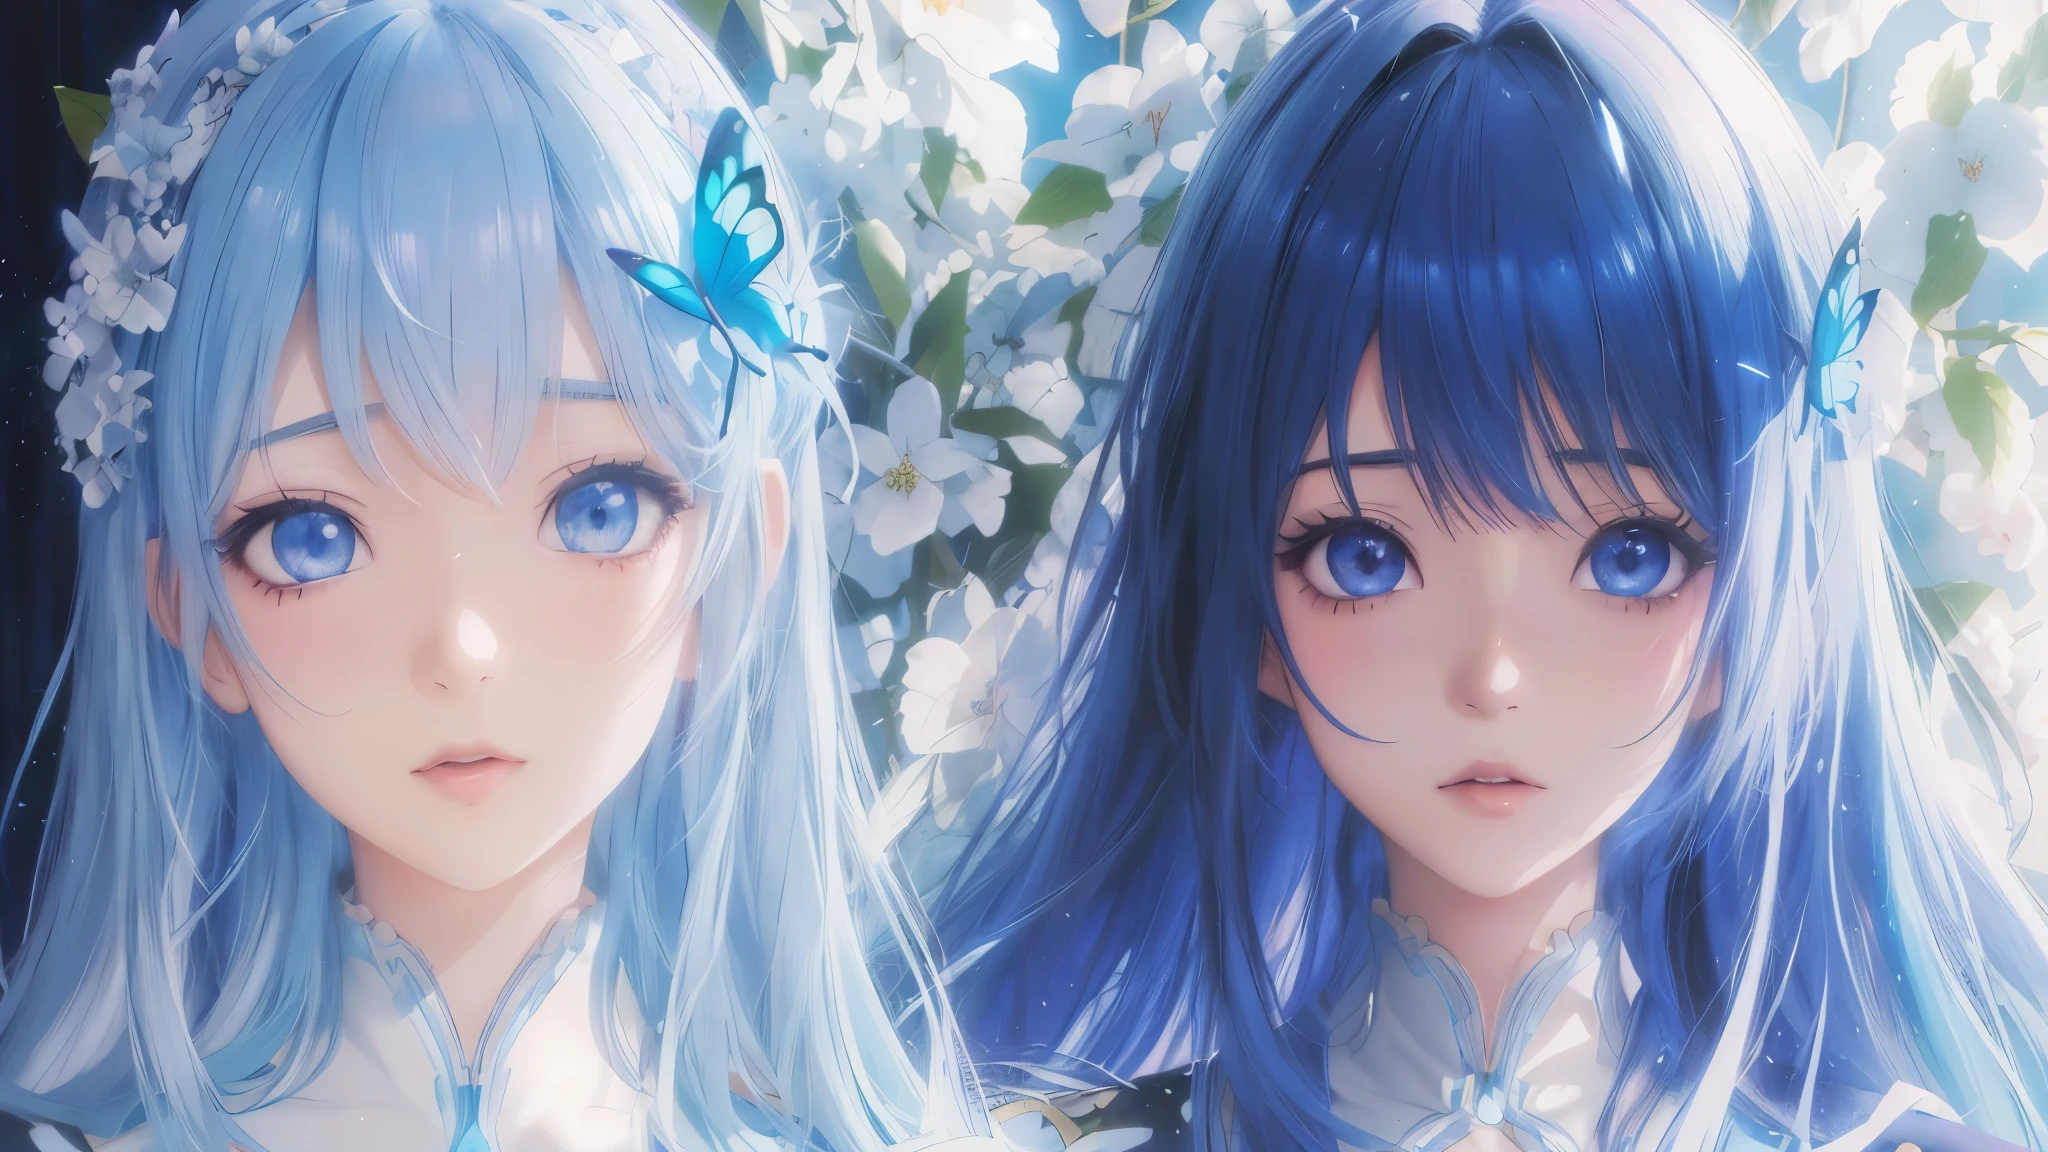 anime girl with blue hair and blue eyes and a butterfly in her hair, 4K anime style, anime art wallpaper 4k, anime art wallpaper 4k, detailed digital anime art, anime art wallpaper 8k, 4k anime wallpaper, manga wallpaper 4k, two beautiful anime girls, beautiful anime illustrations, Guweiz and Artstation Pixiv